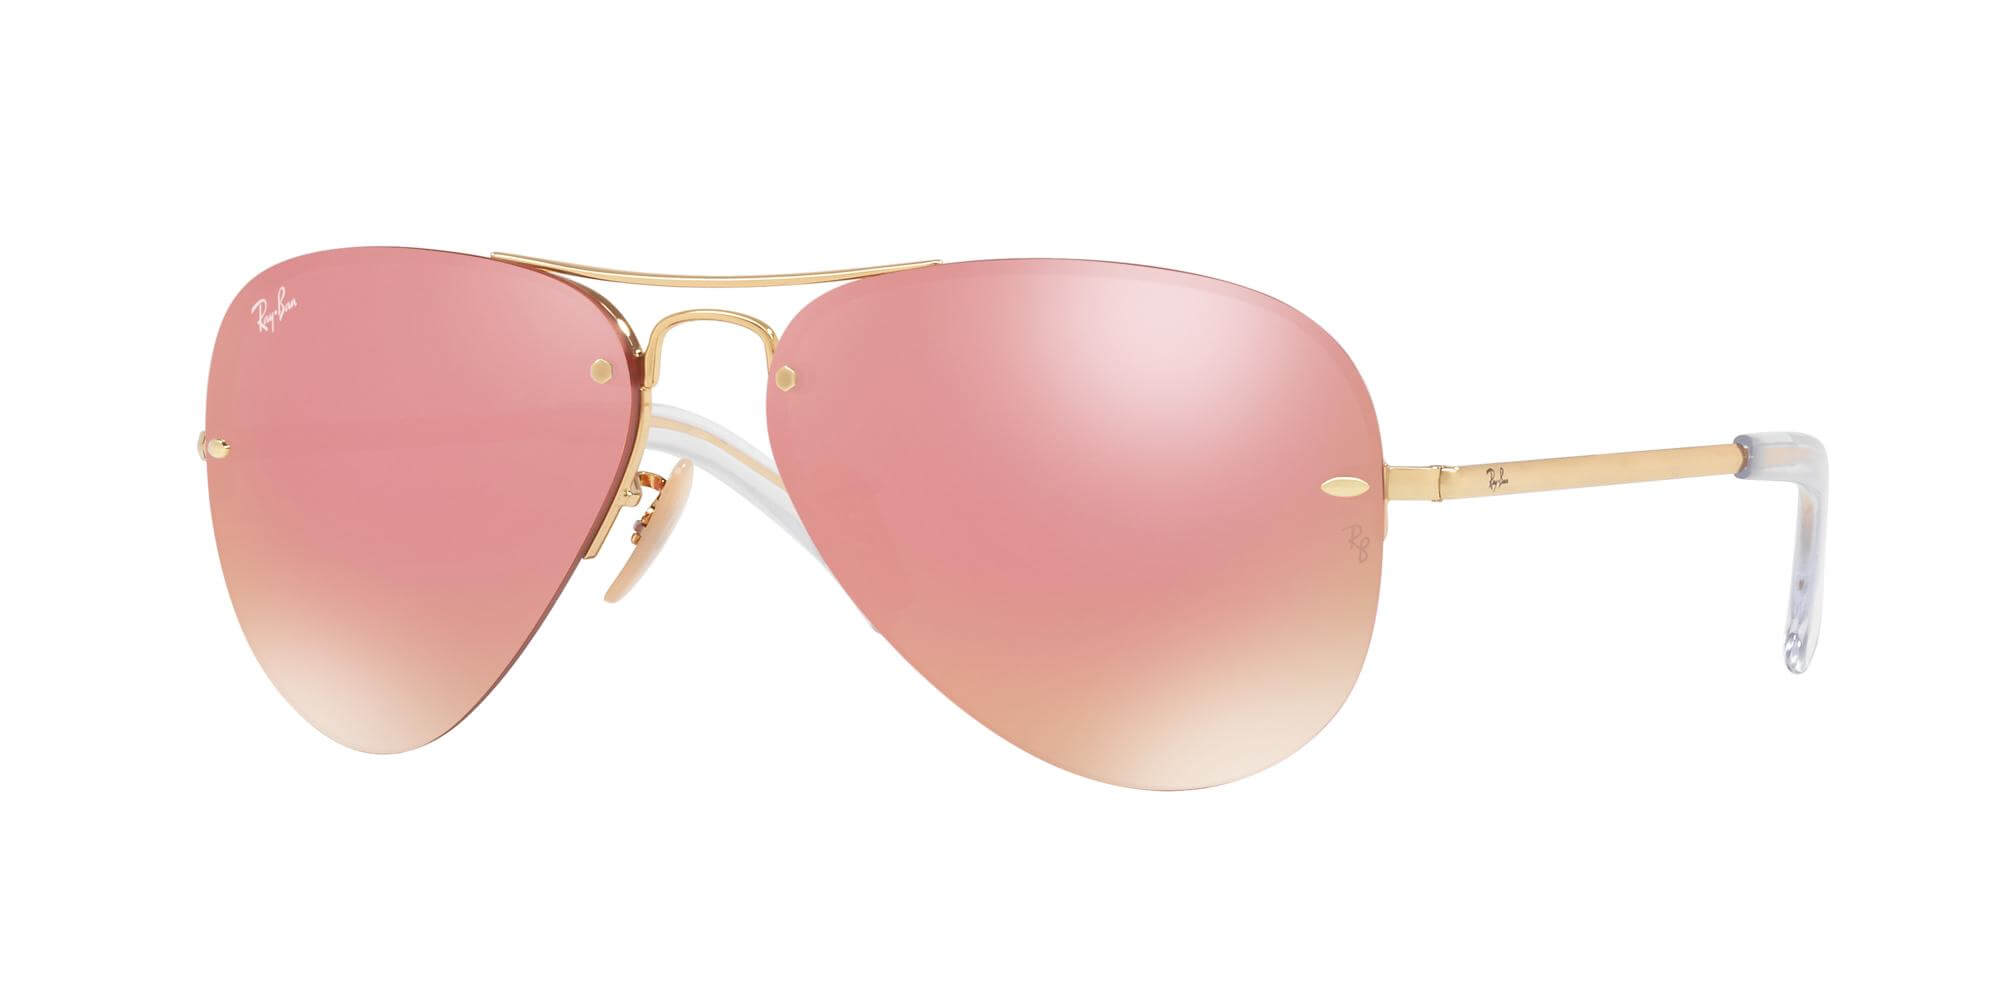 Ray-BanRB 3449Gold/pink Copper (001/E4 A)